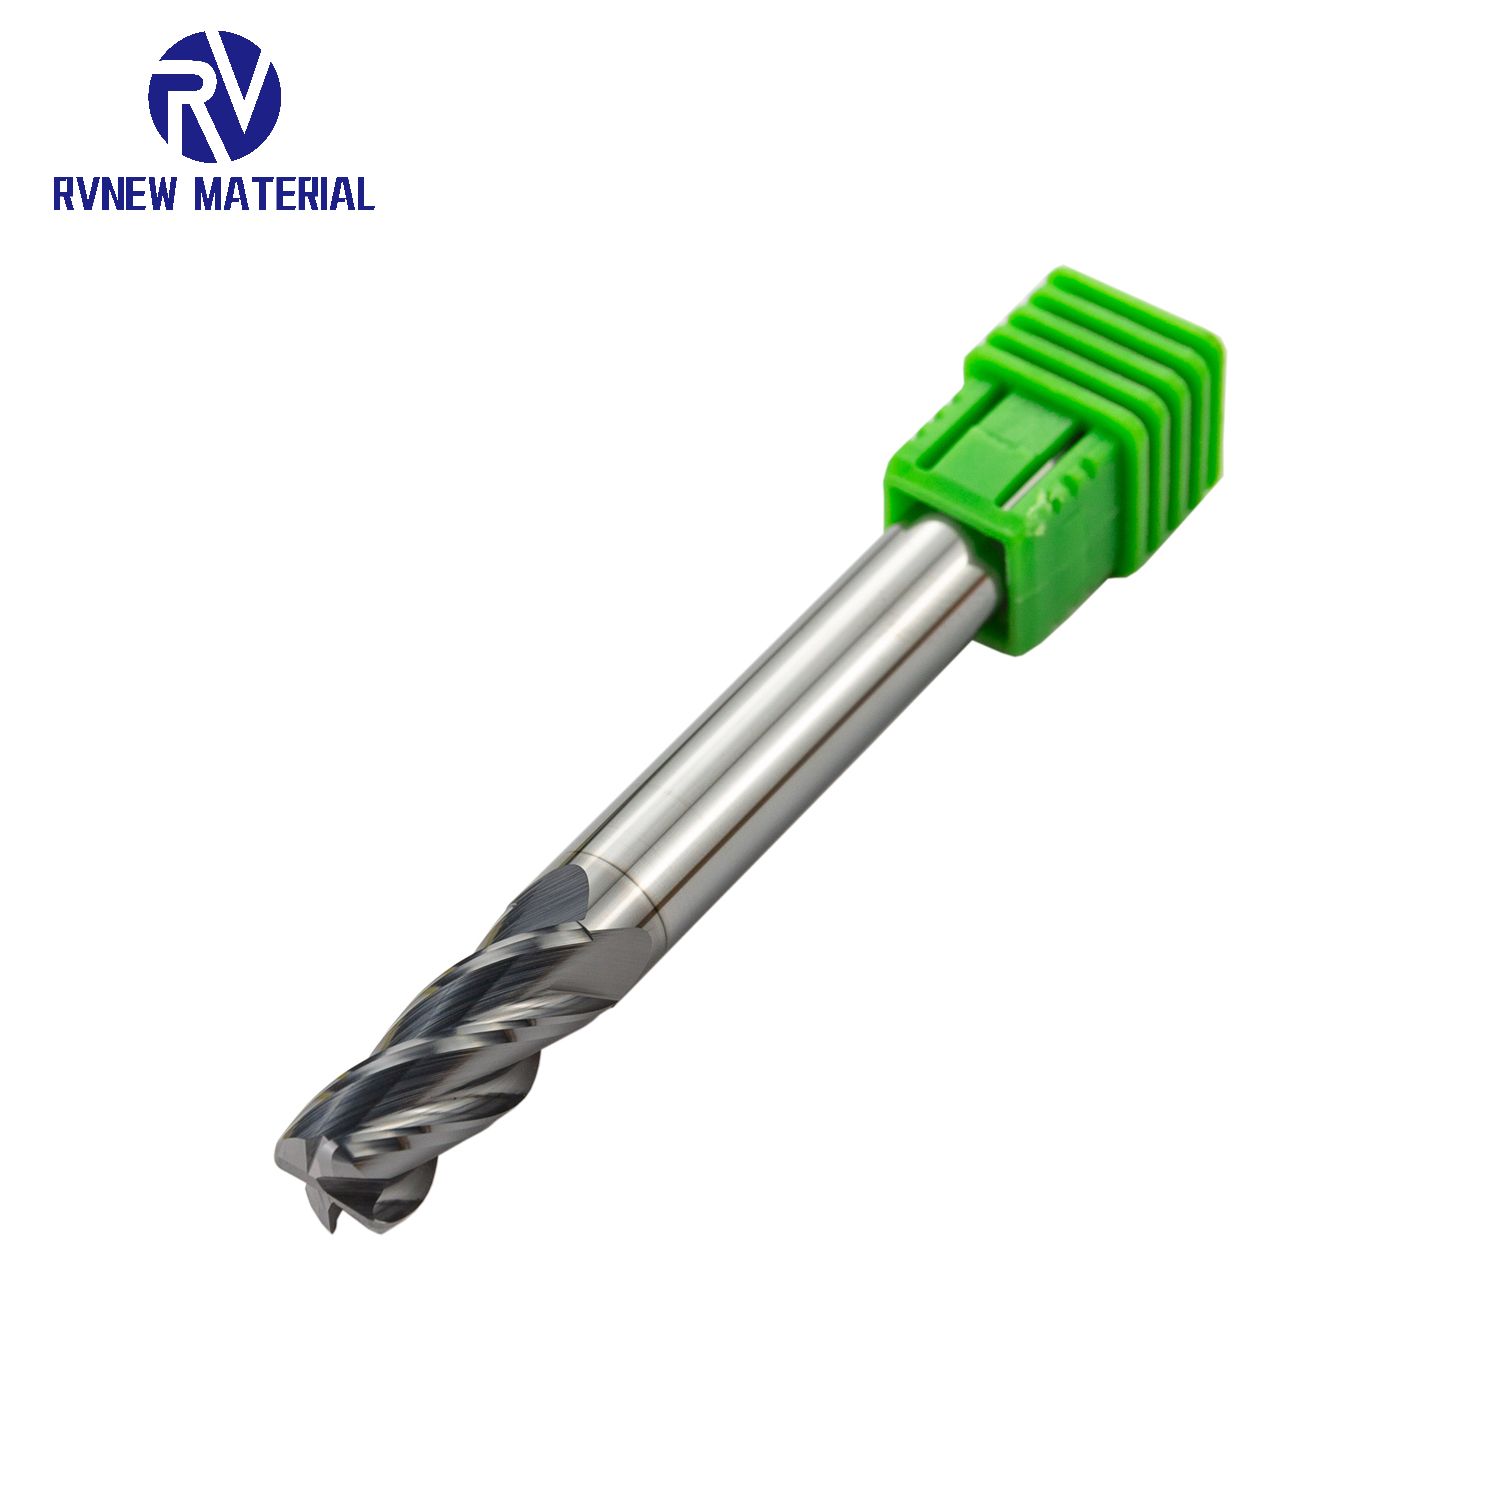 RV milling cutter end mills for stainless steel processing